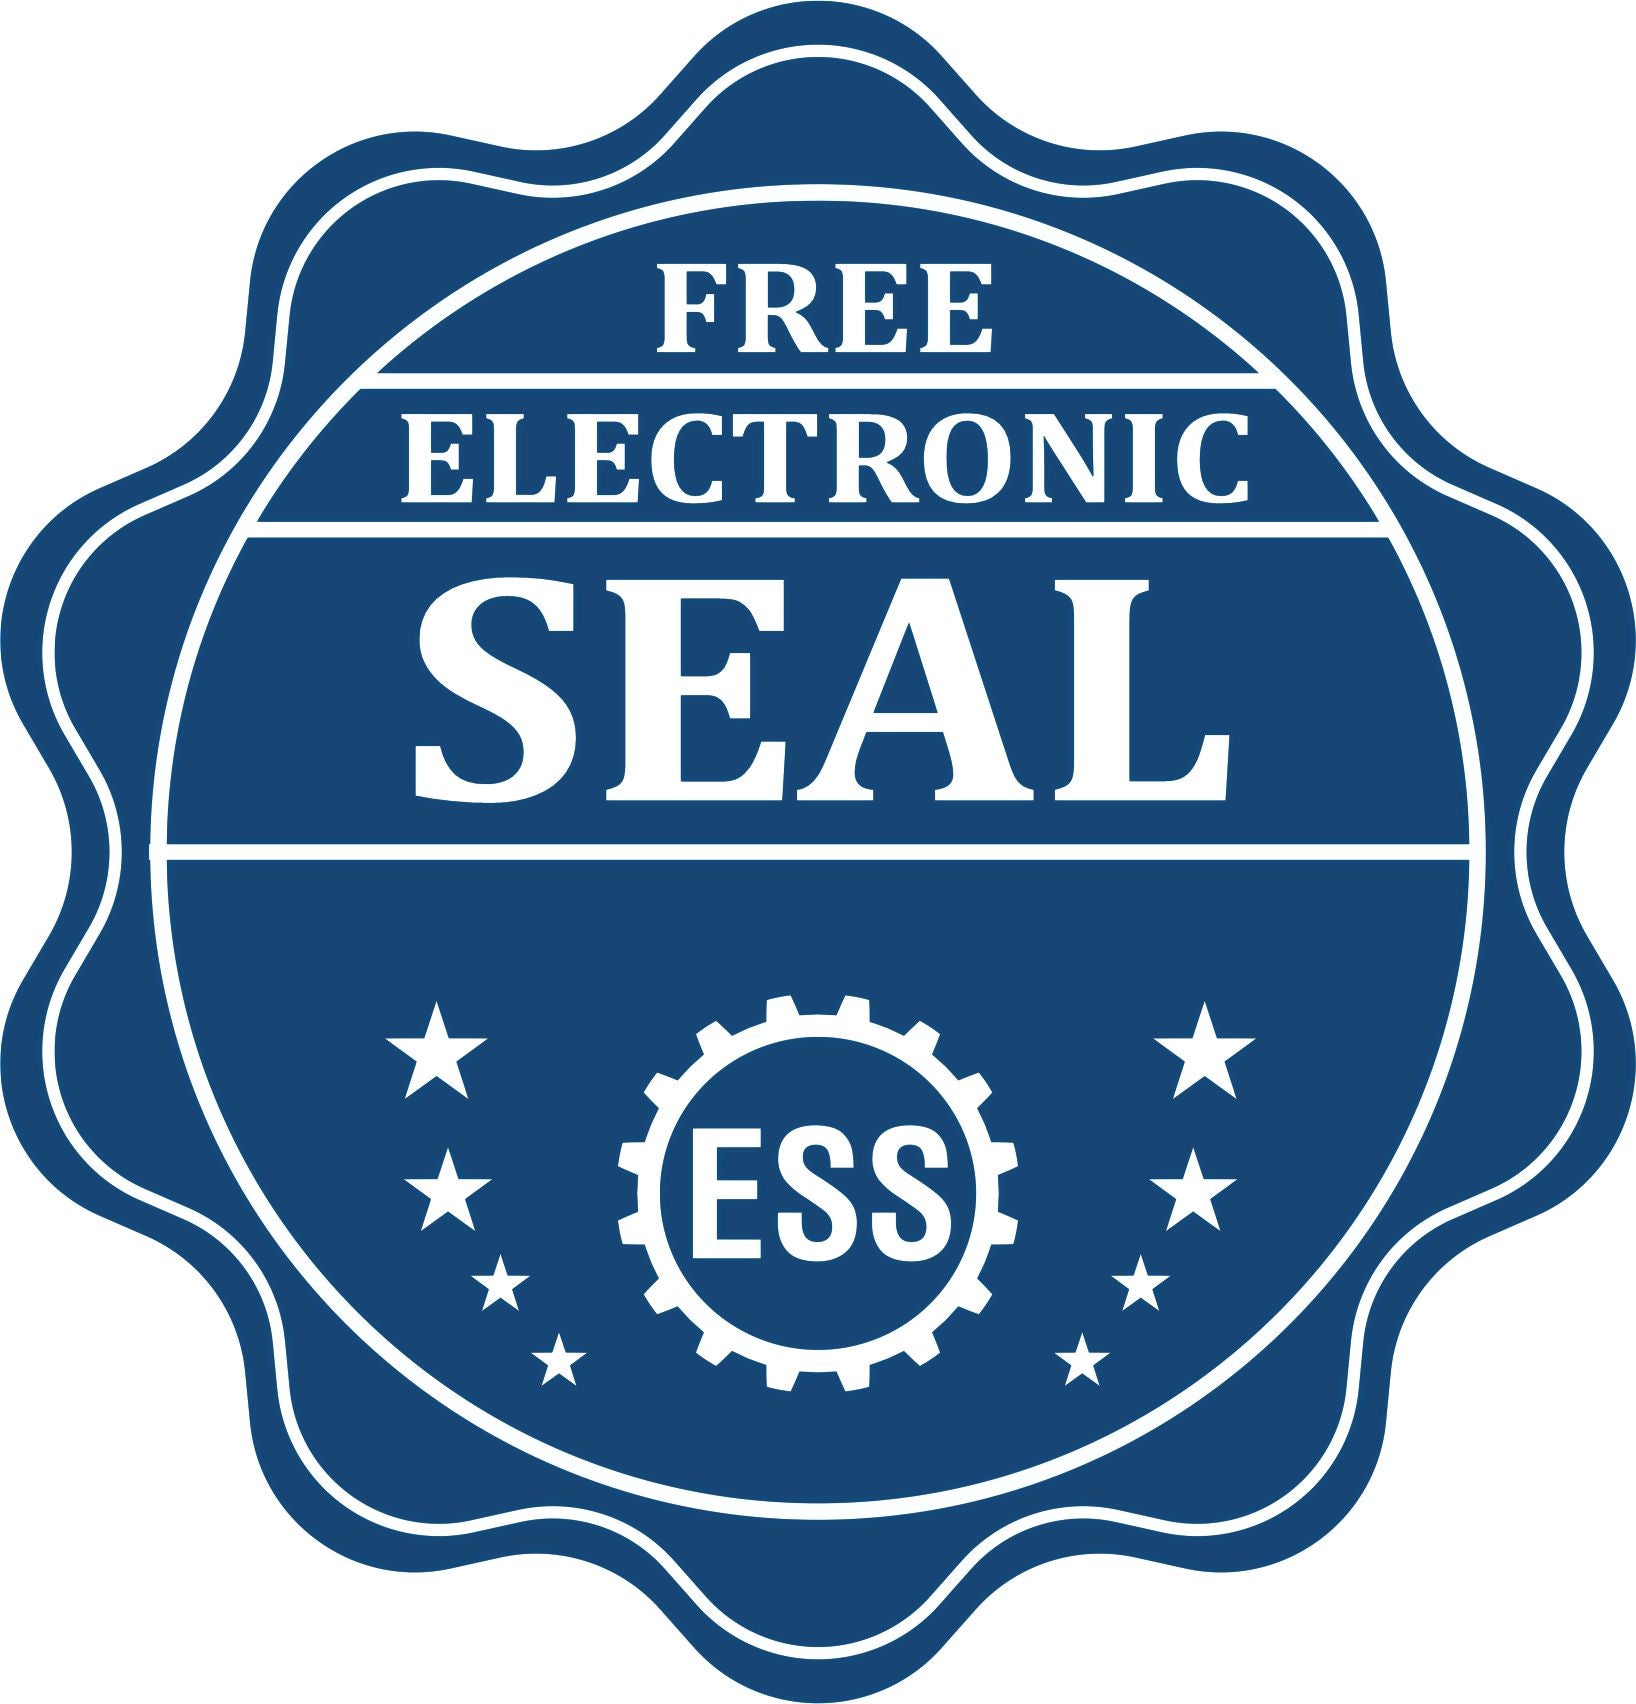 A badge showing a free electronic seal for the State of Indiana Extended Long Reach Geologist Seal with stars and the ESS gear on the emblem.